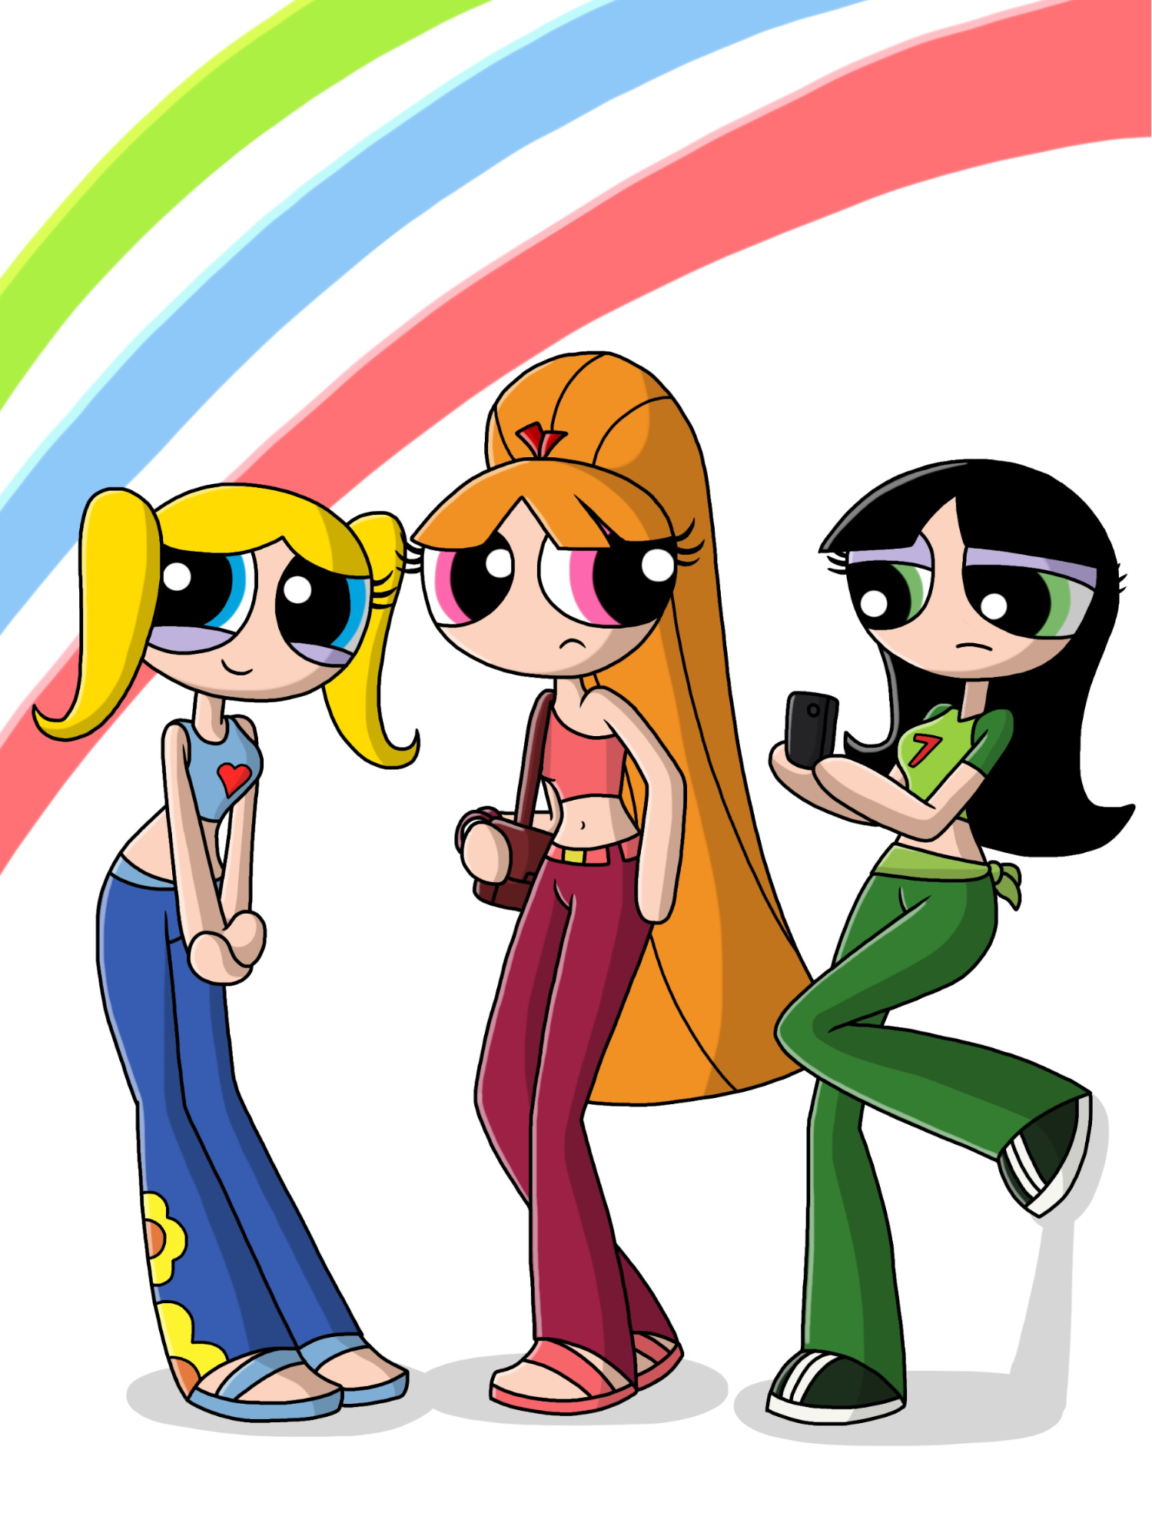 Blossom, Bubbles, and Buttercup all grown up.